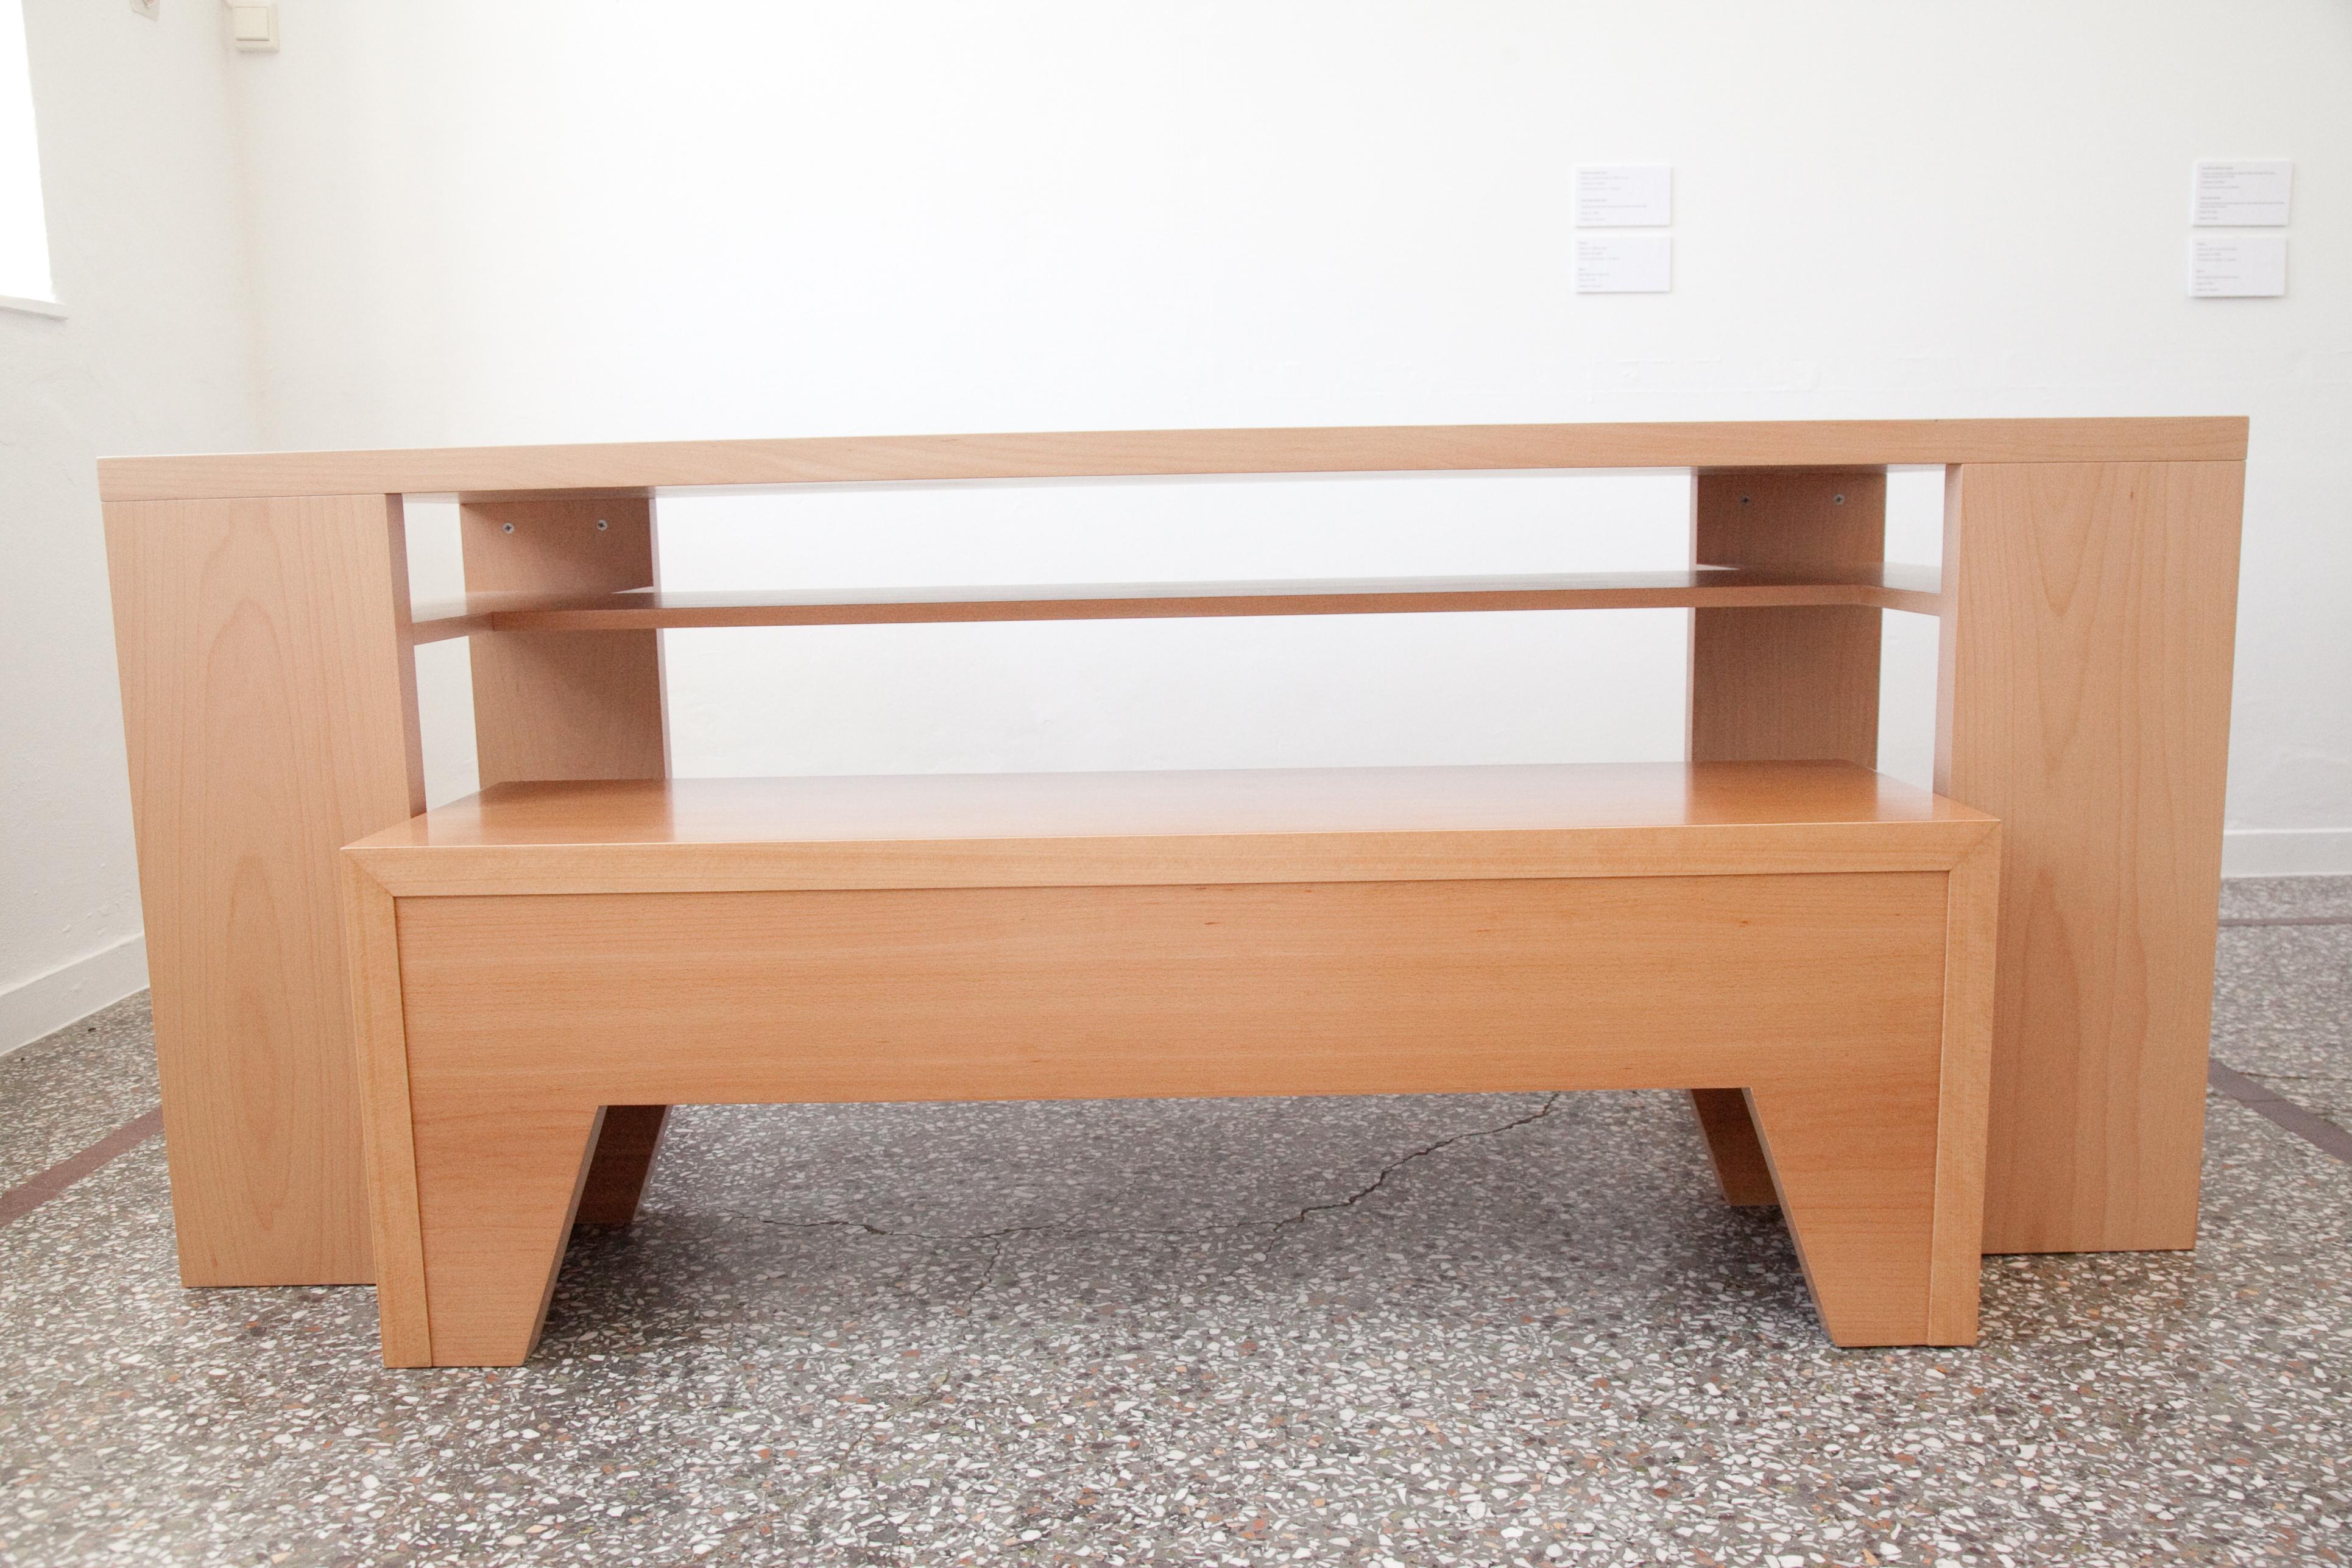 Greek 21st Century, Minimalist, European, Bench Made of Lined Beechwood in Light Brown For Sale